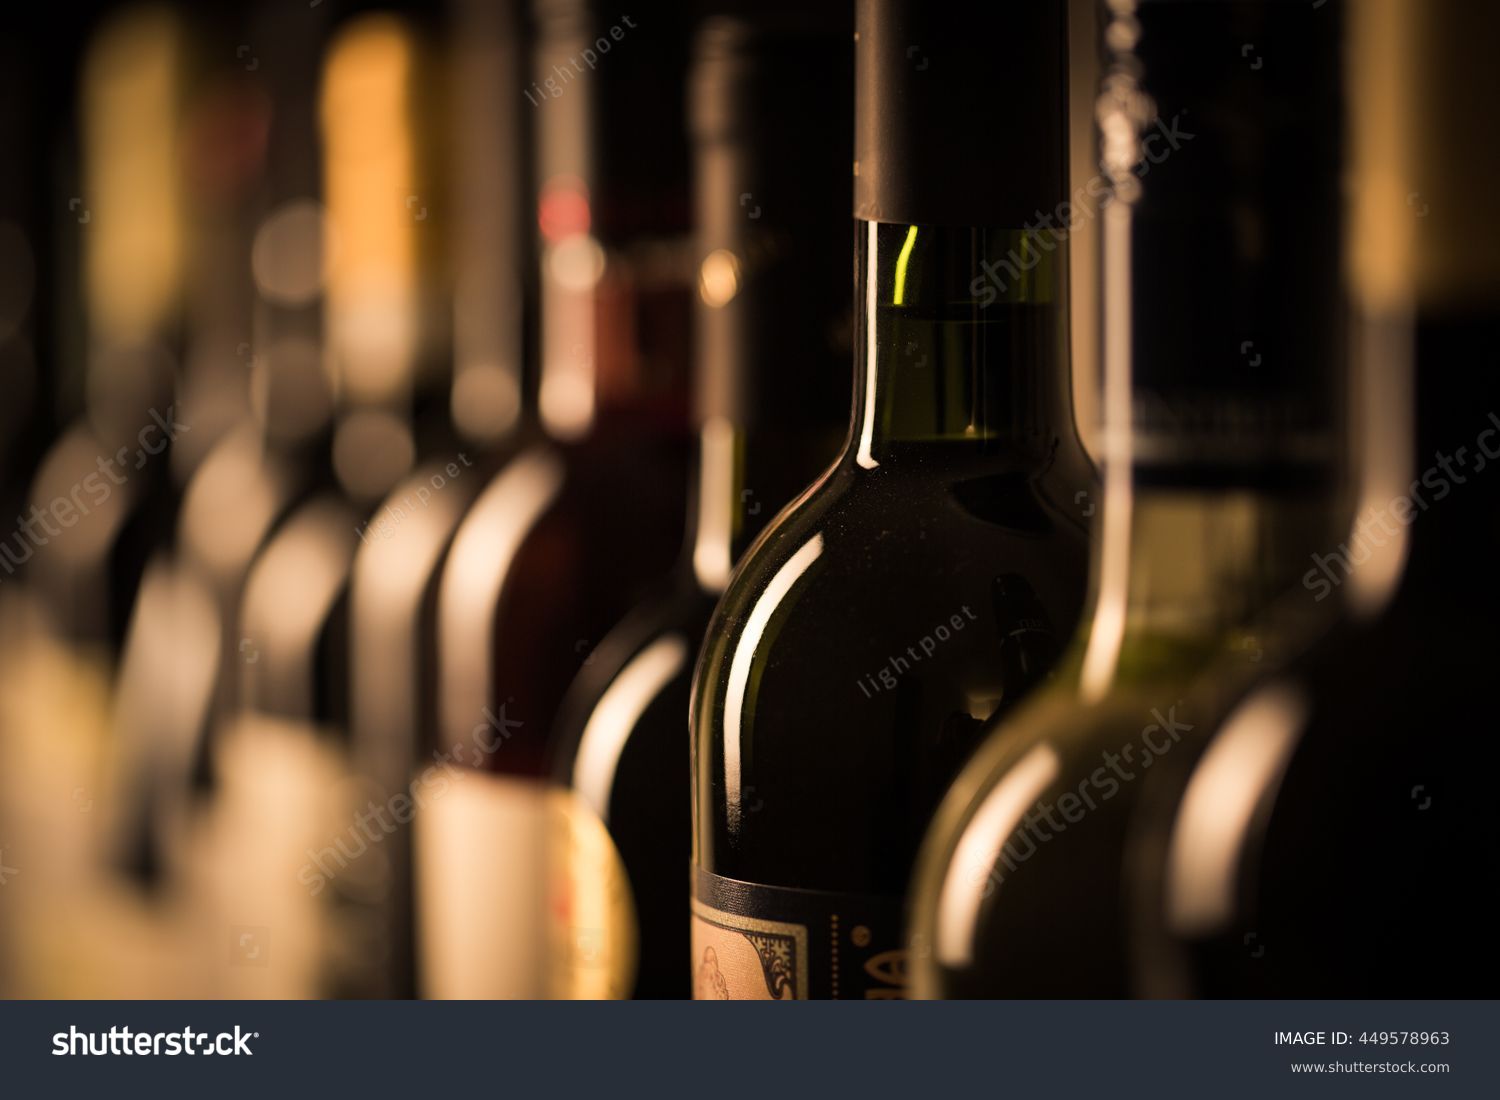 Row of vintage wine bottles in a wine cellar (shallow DOF; color toned image) #449578963